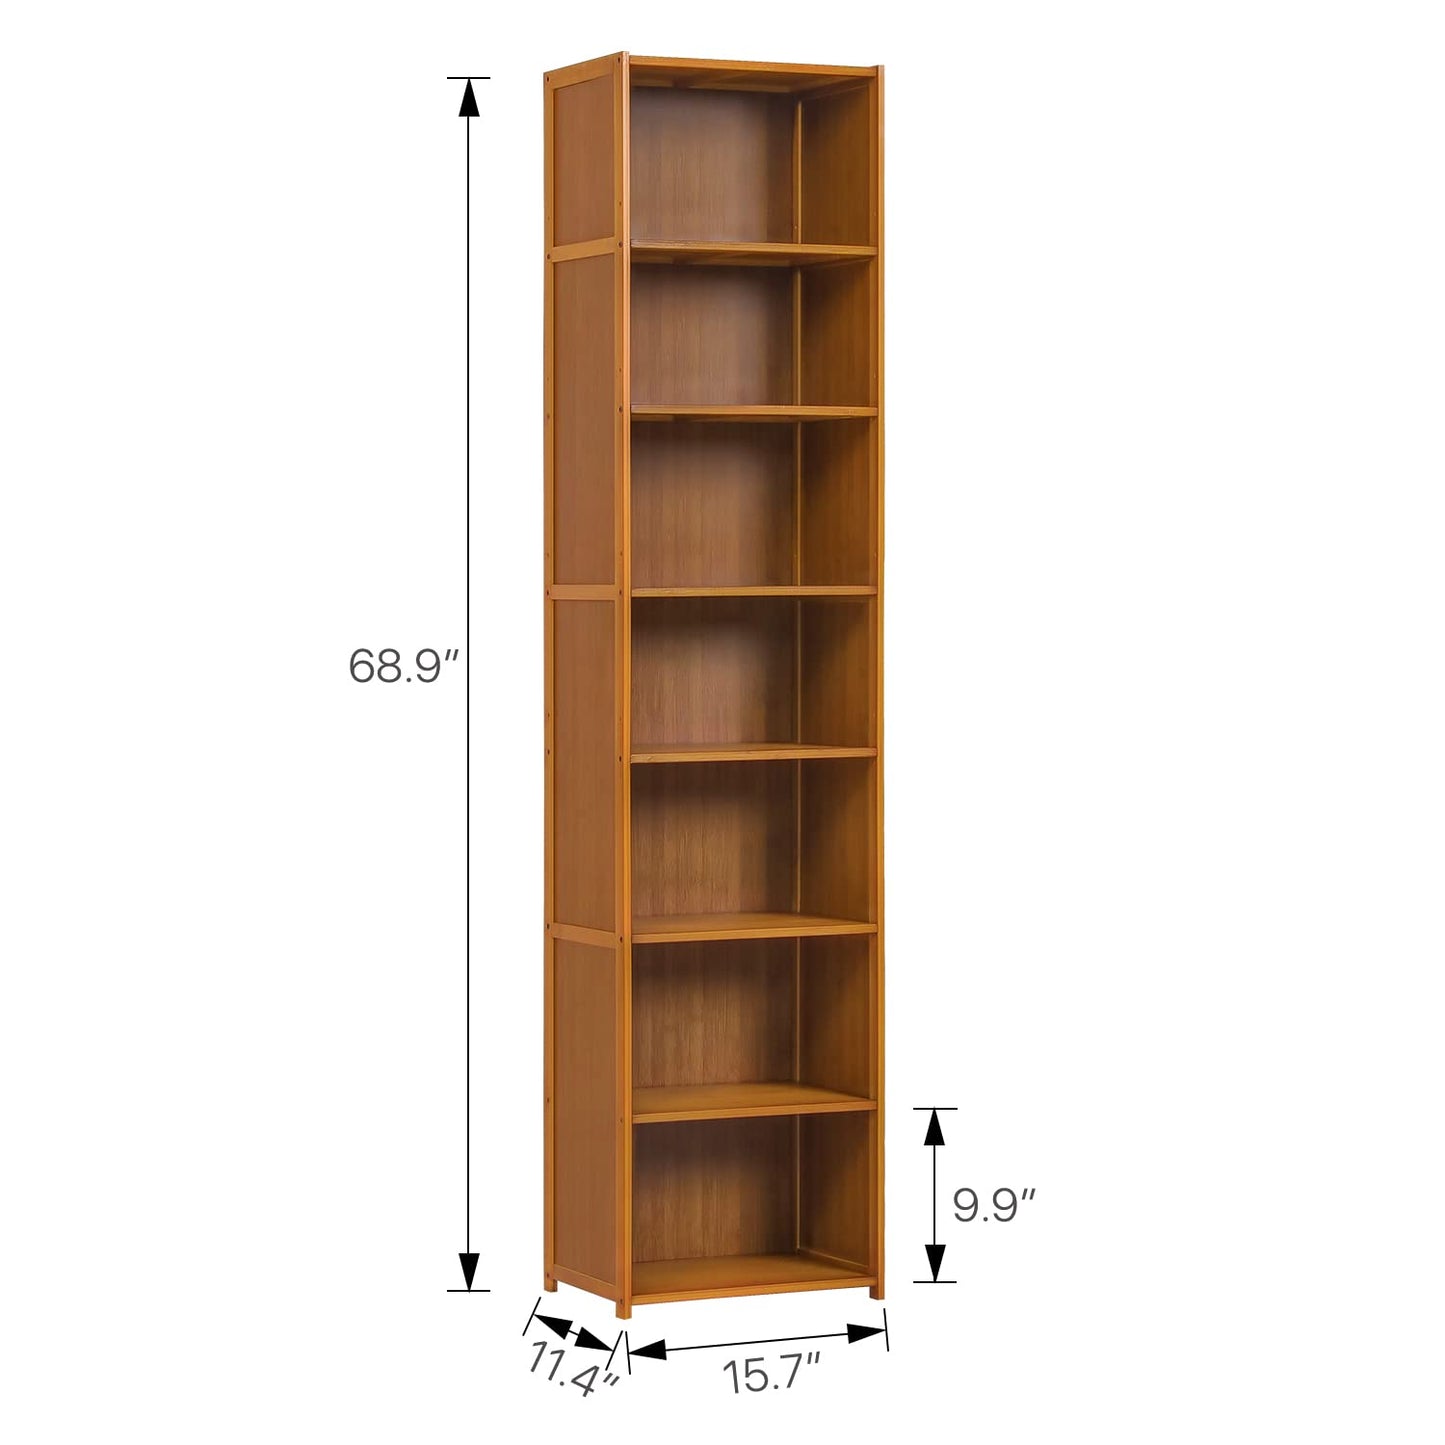 MoNiBloom Bamboo 7 Tier Free Standing Tall Bookcase Narrow Display Storage Shelves Collection Décor Furniture for Home Living Room Study Room, Brown